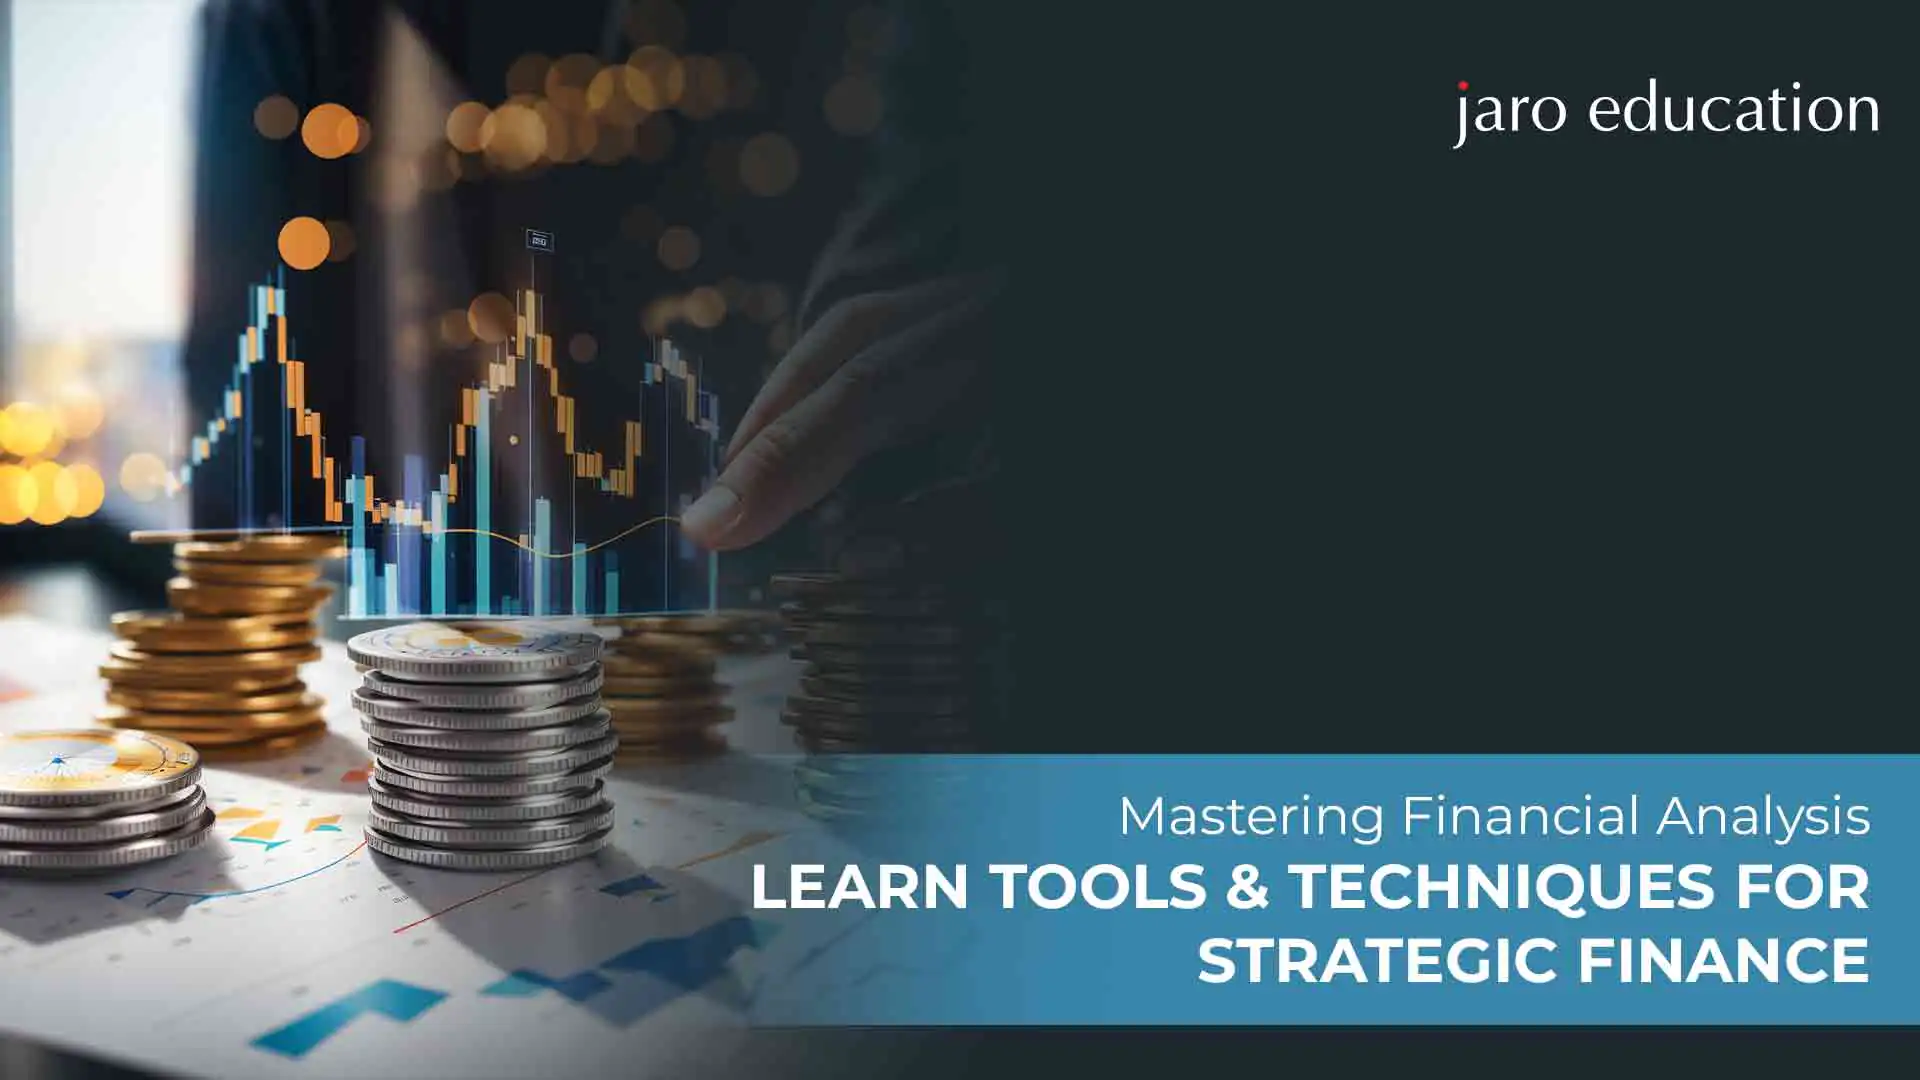 Mastering Financial Analysis Learn Tools & Techniques for Strategic Finance